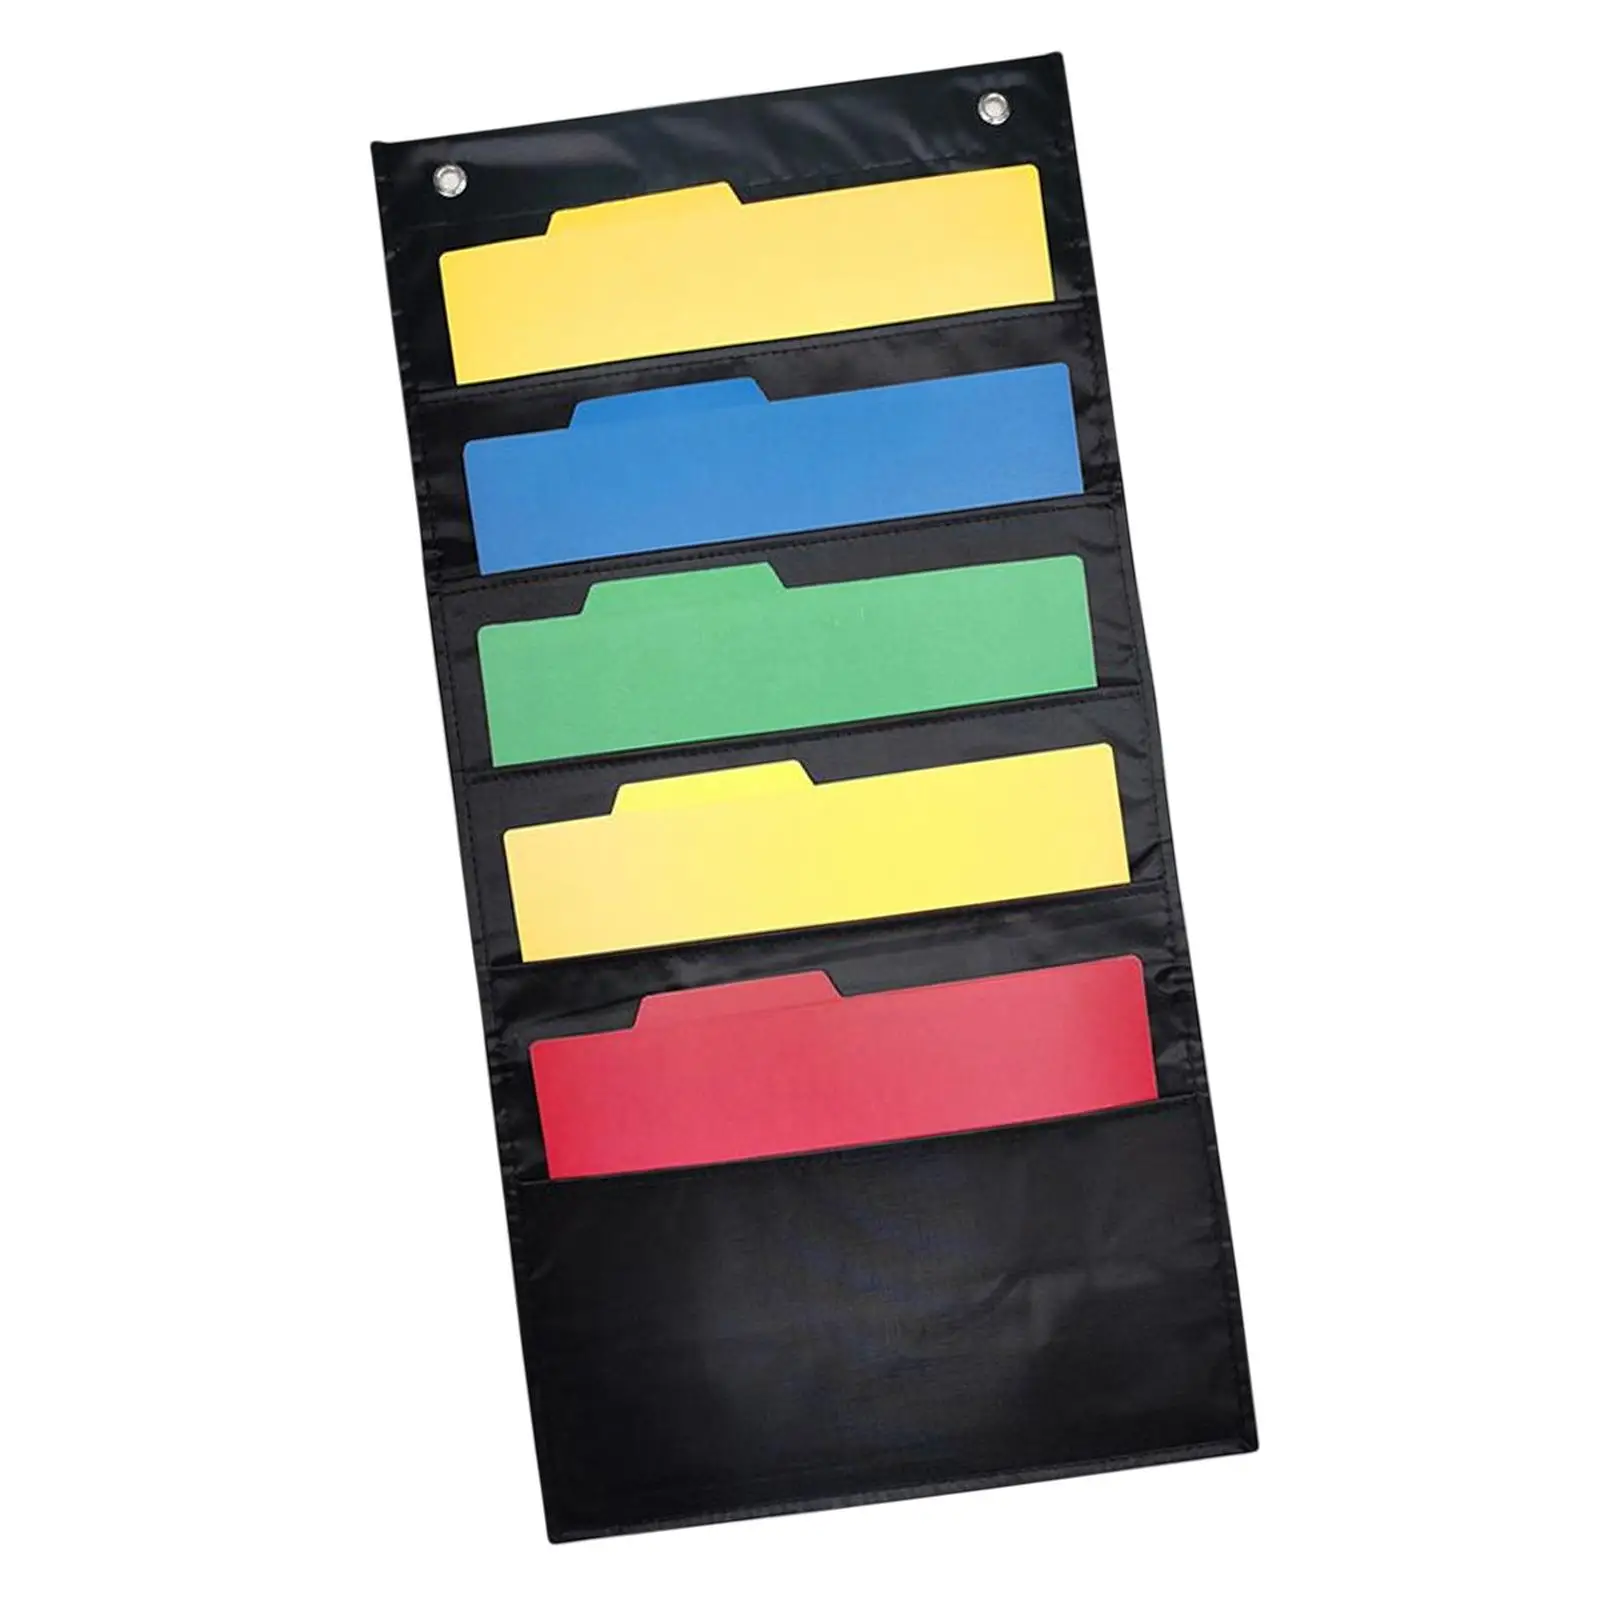 Hanging Schedule Pocket Chart Wall File Organizer Storage Bag for Home Office Mailbox